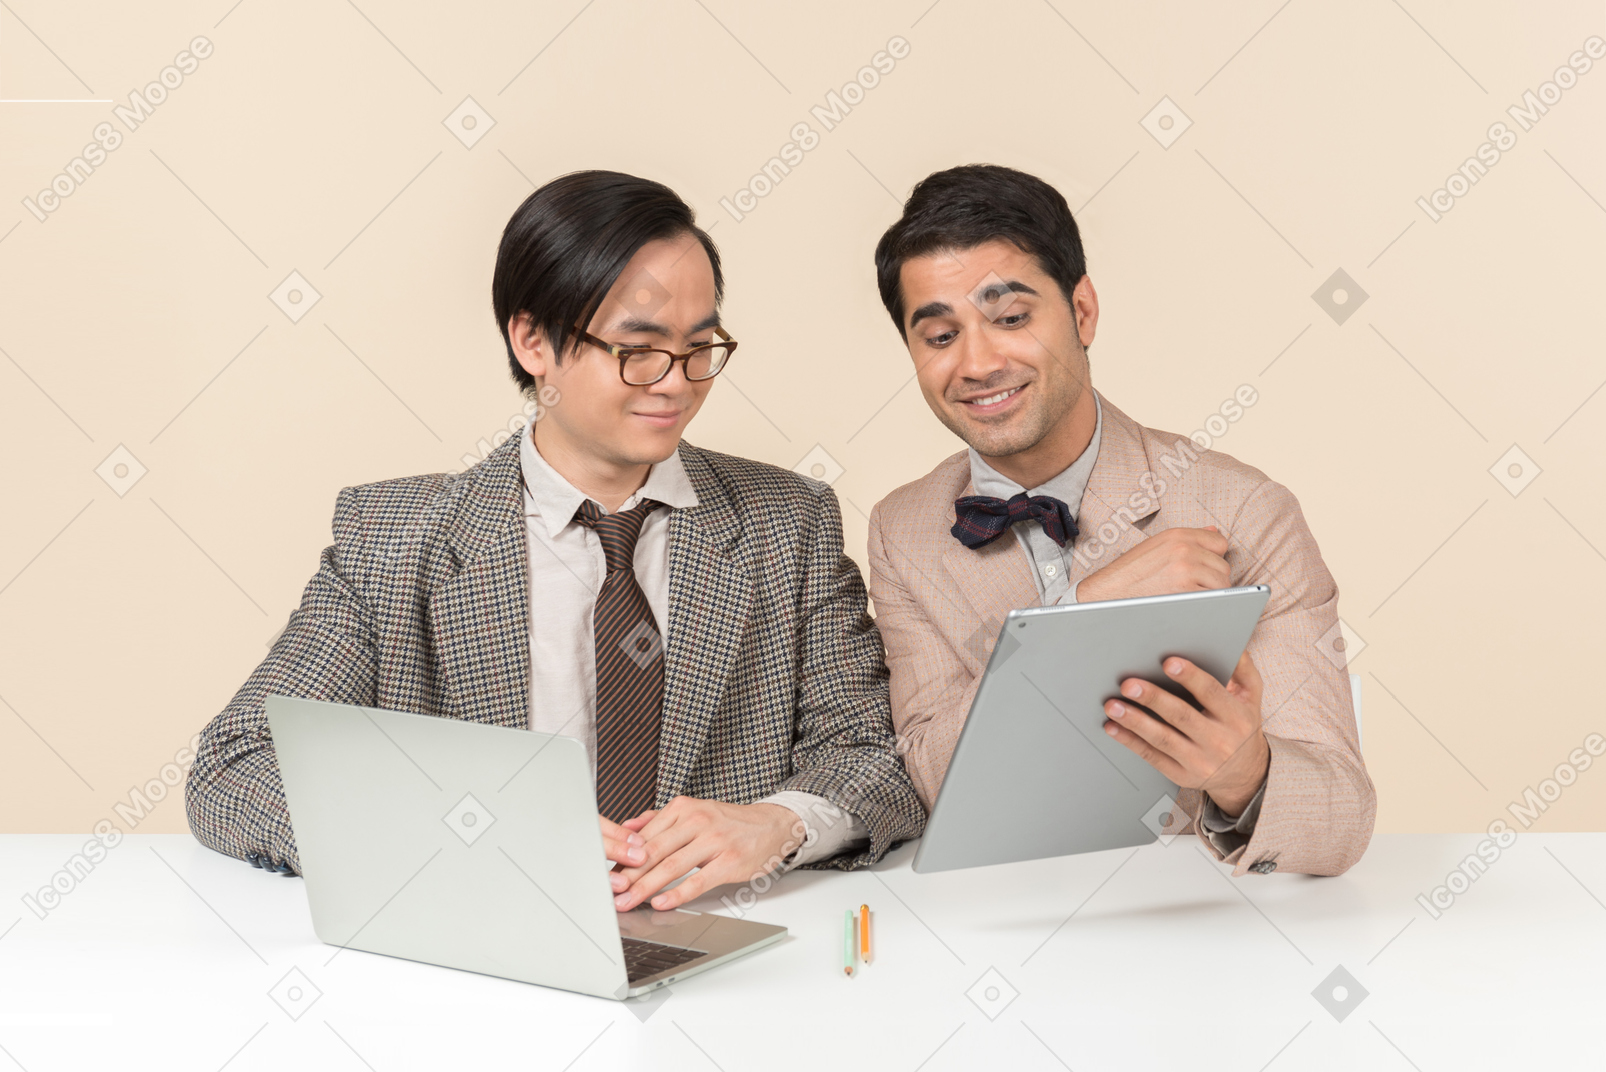 Two young nerds sitting at the table and using gadgets